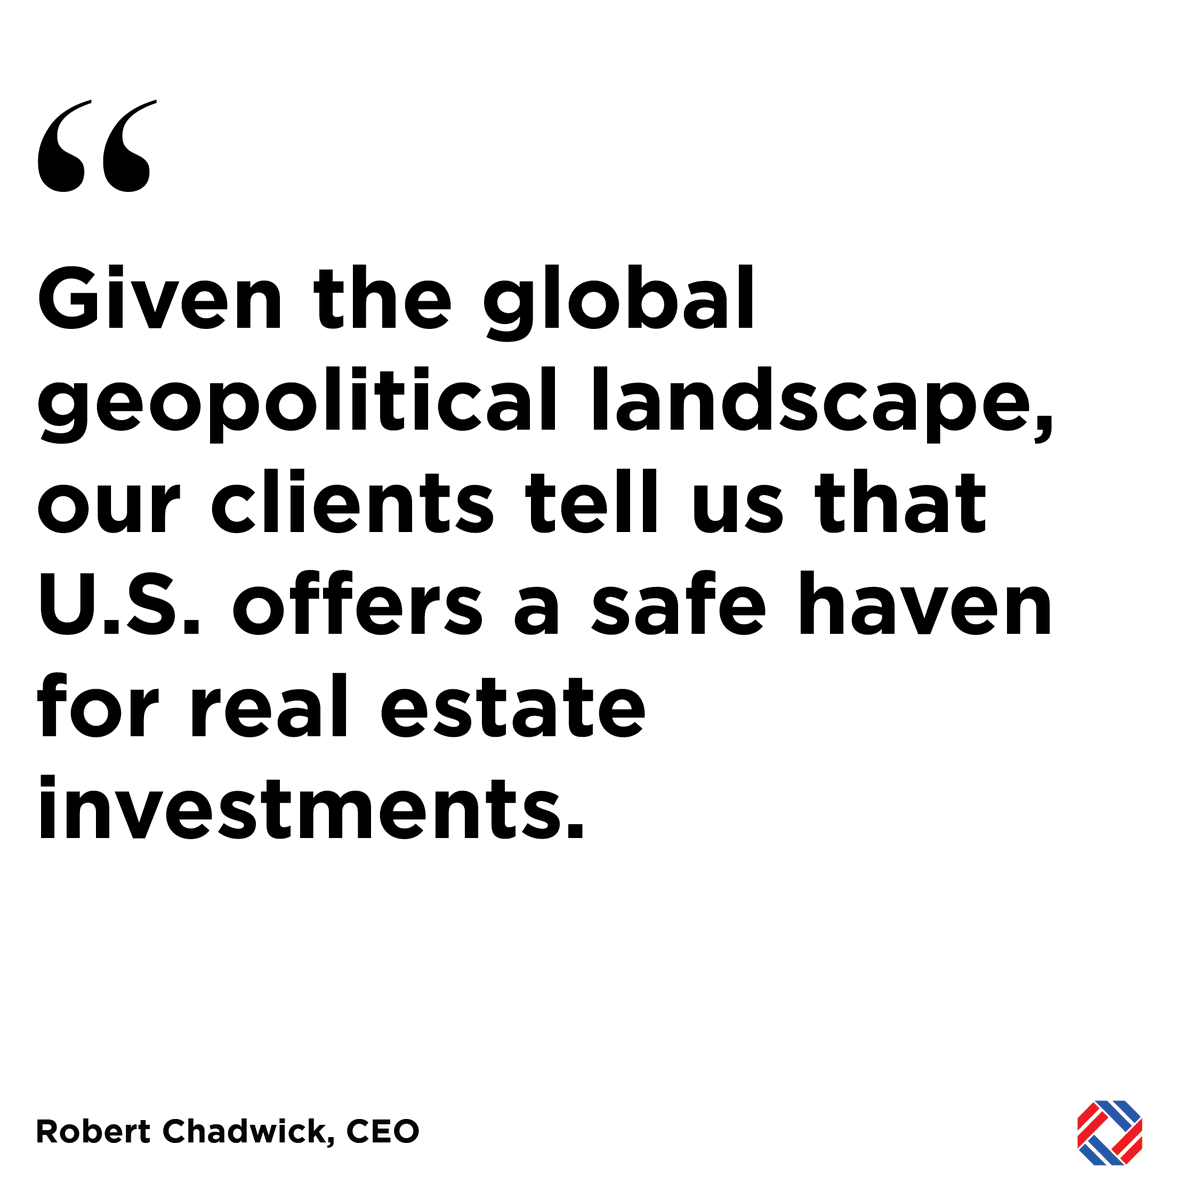 'Given the global geopolitical landscape, our clients tell us that U.S. offers a safe haven for real estate investments.' - Robert Chadwick, CEO

americamortgages.com
.
.
.
#realestate #mortgage #mortgagelending #mortgages #expatmortgages #mortgageprocess #propertyinvestor #US